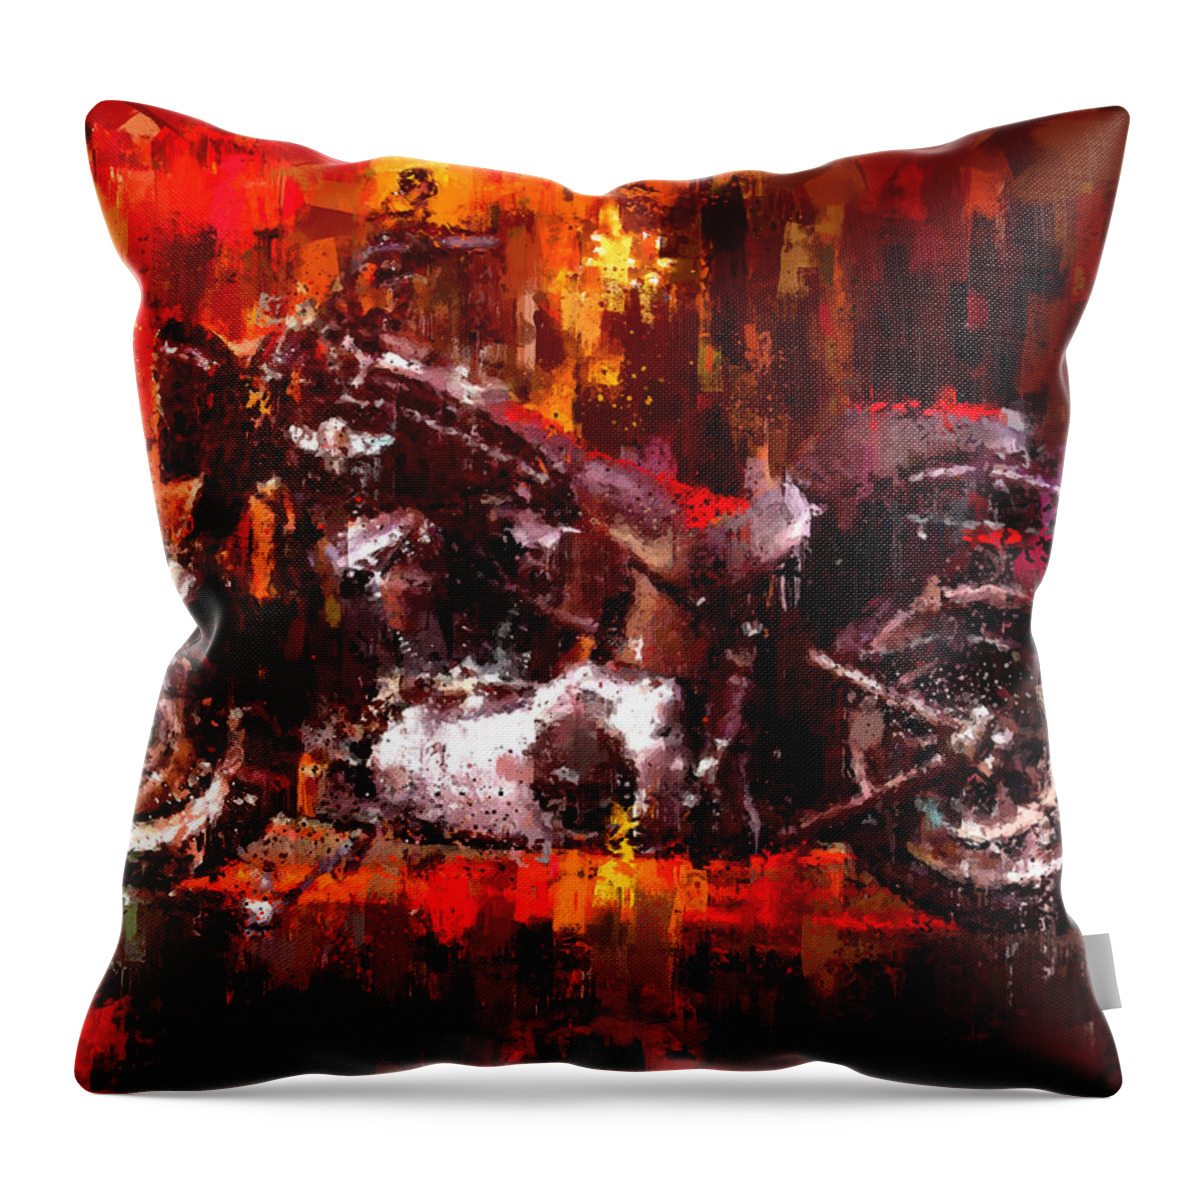  Impressionism Throw Pillow featuring the painting Harley Davidson Fat Boy dark by Vart Studio